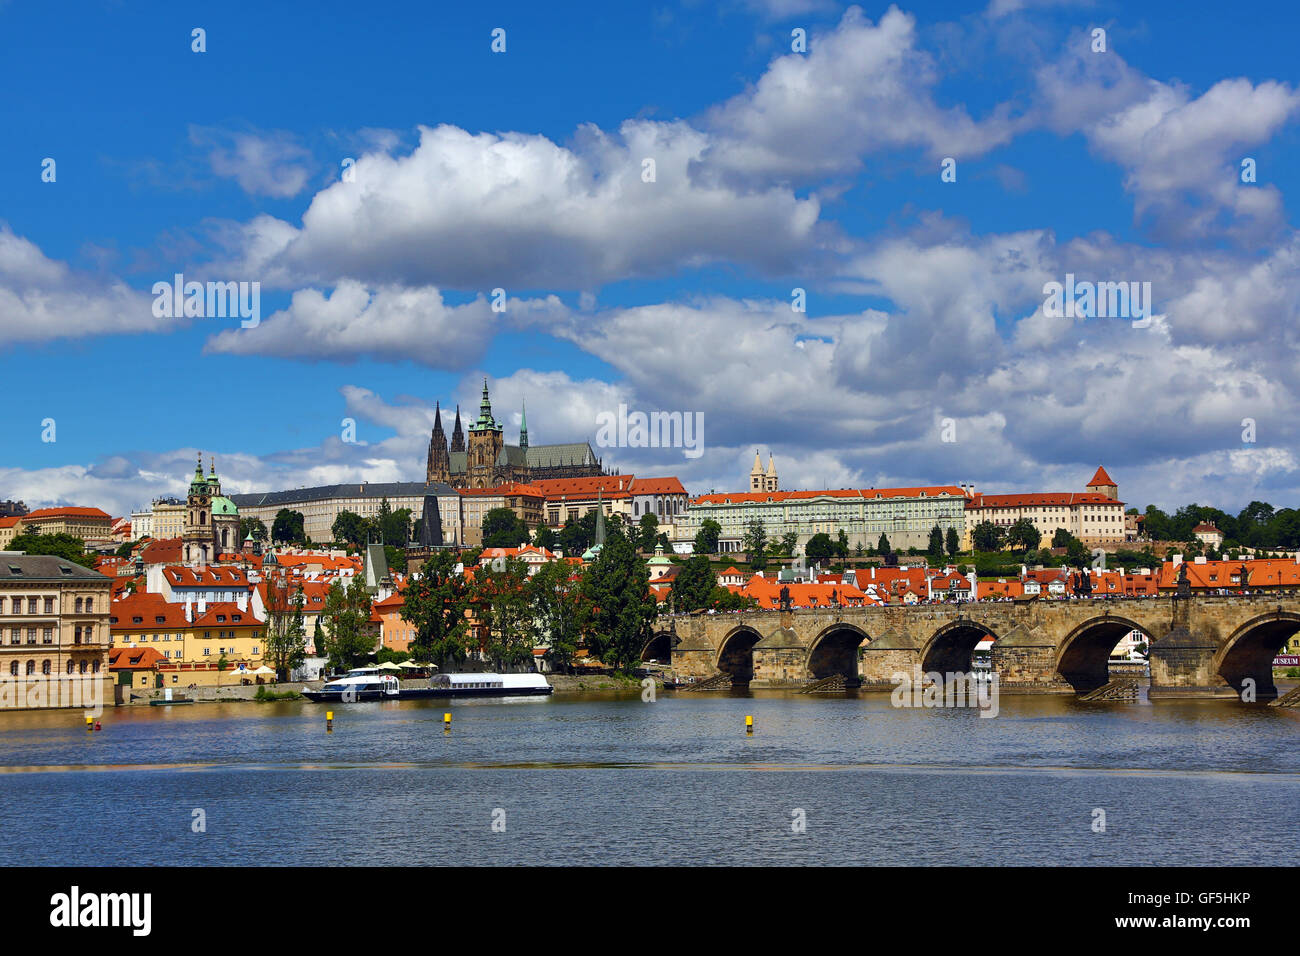 St. Vitus Cathedral and Prague Castle with the Charles Bridge over the Vltava River in Prague, Czech Republic Stock Photo